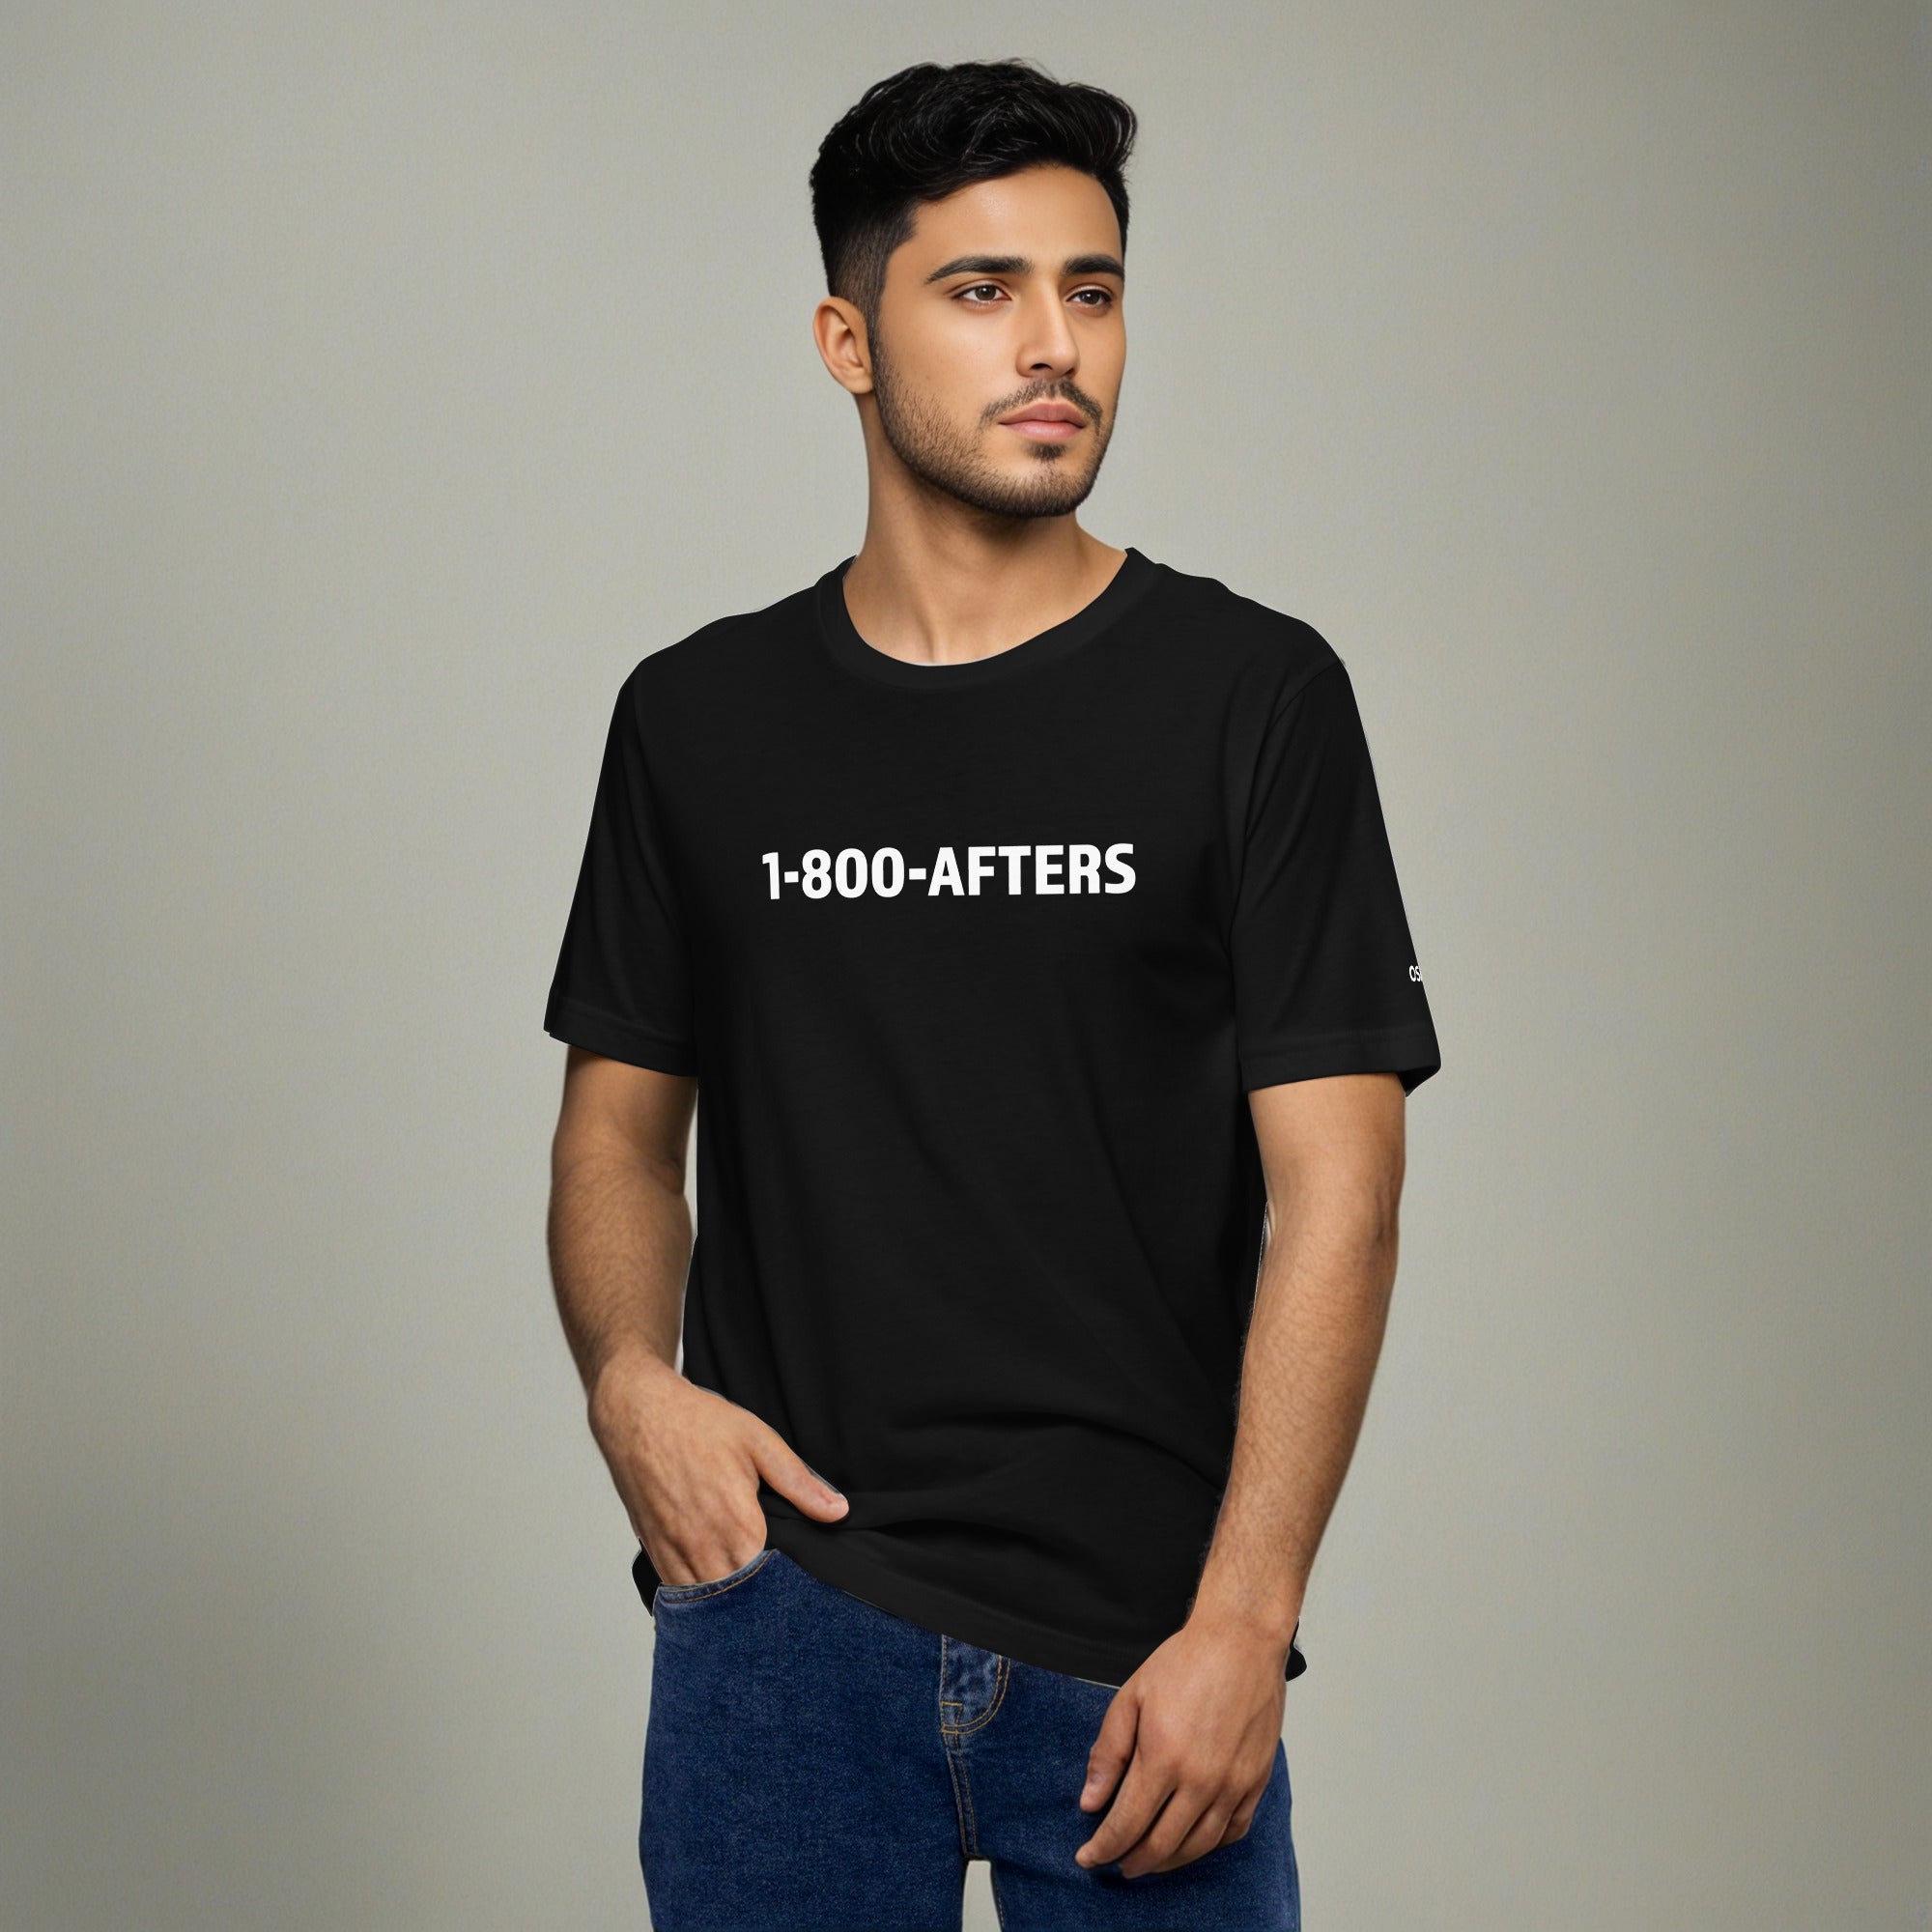 1-800-Afters T-Shirt